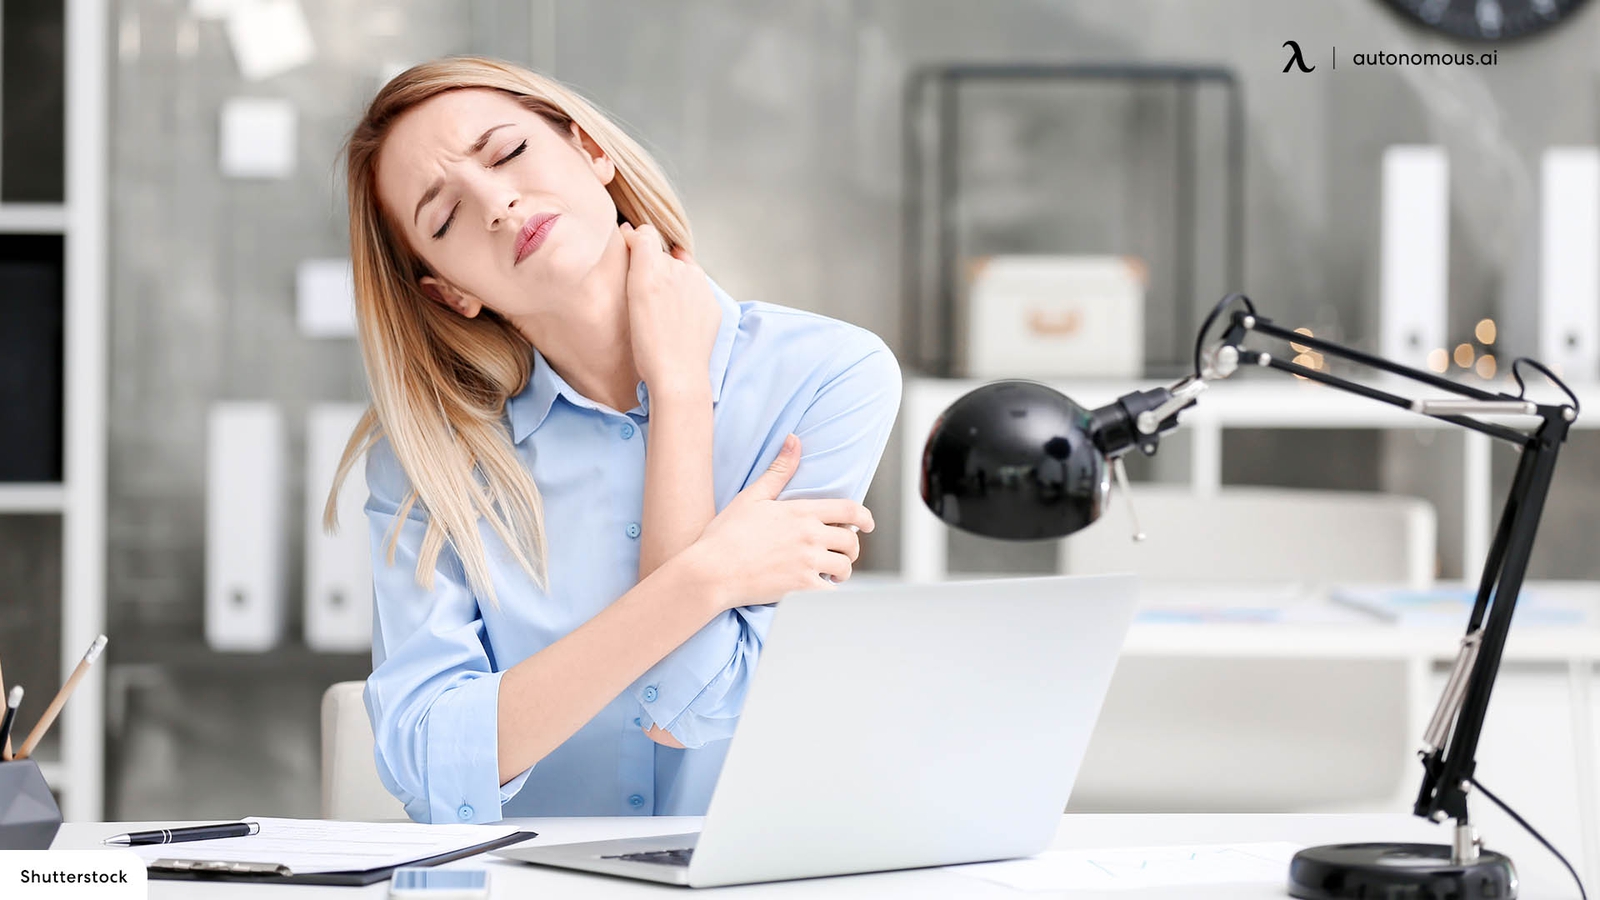 4 Ergonomic Problems You May Encounter in The Workplace